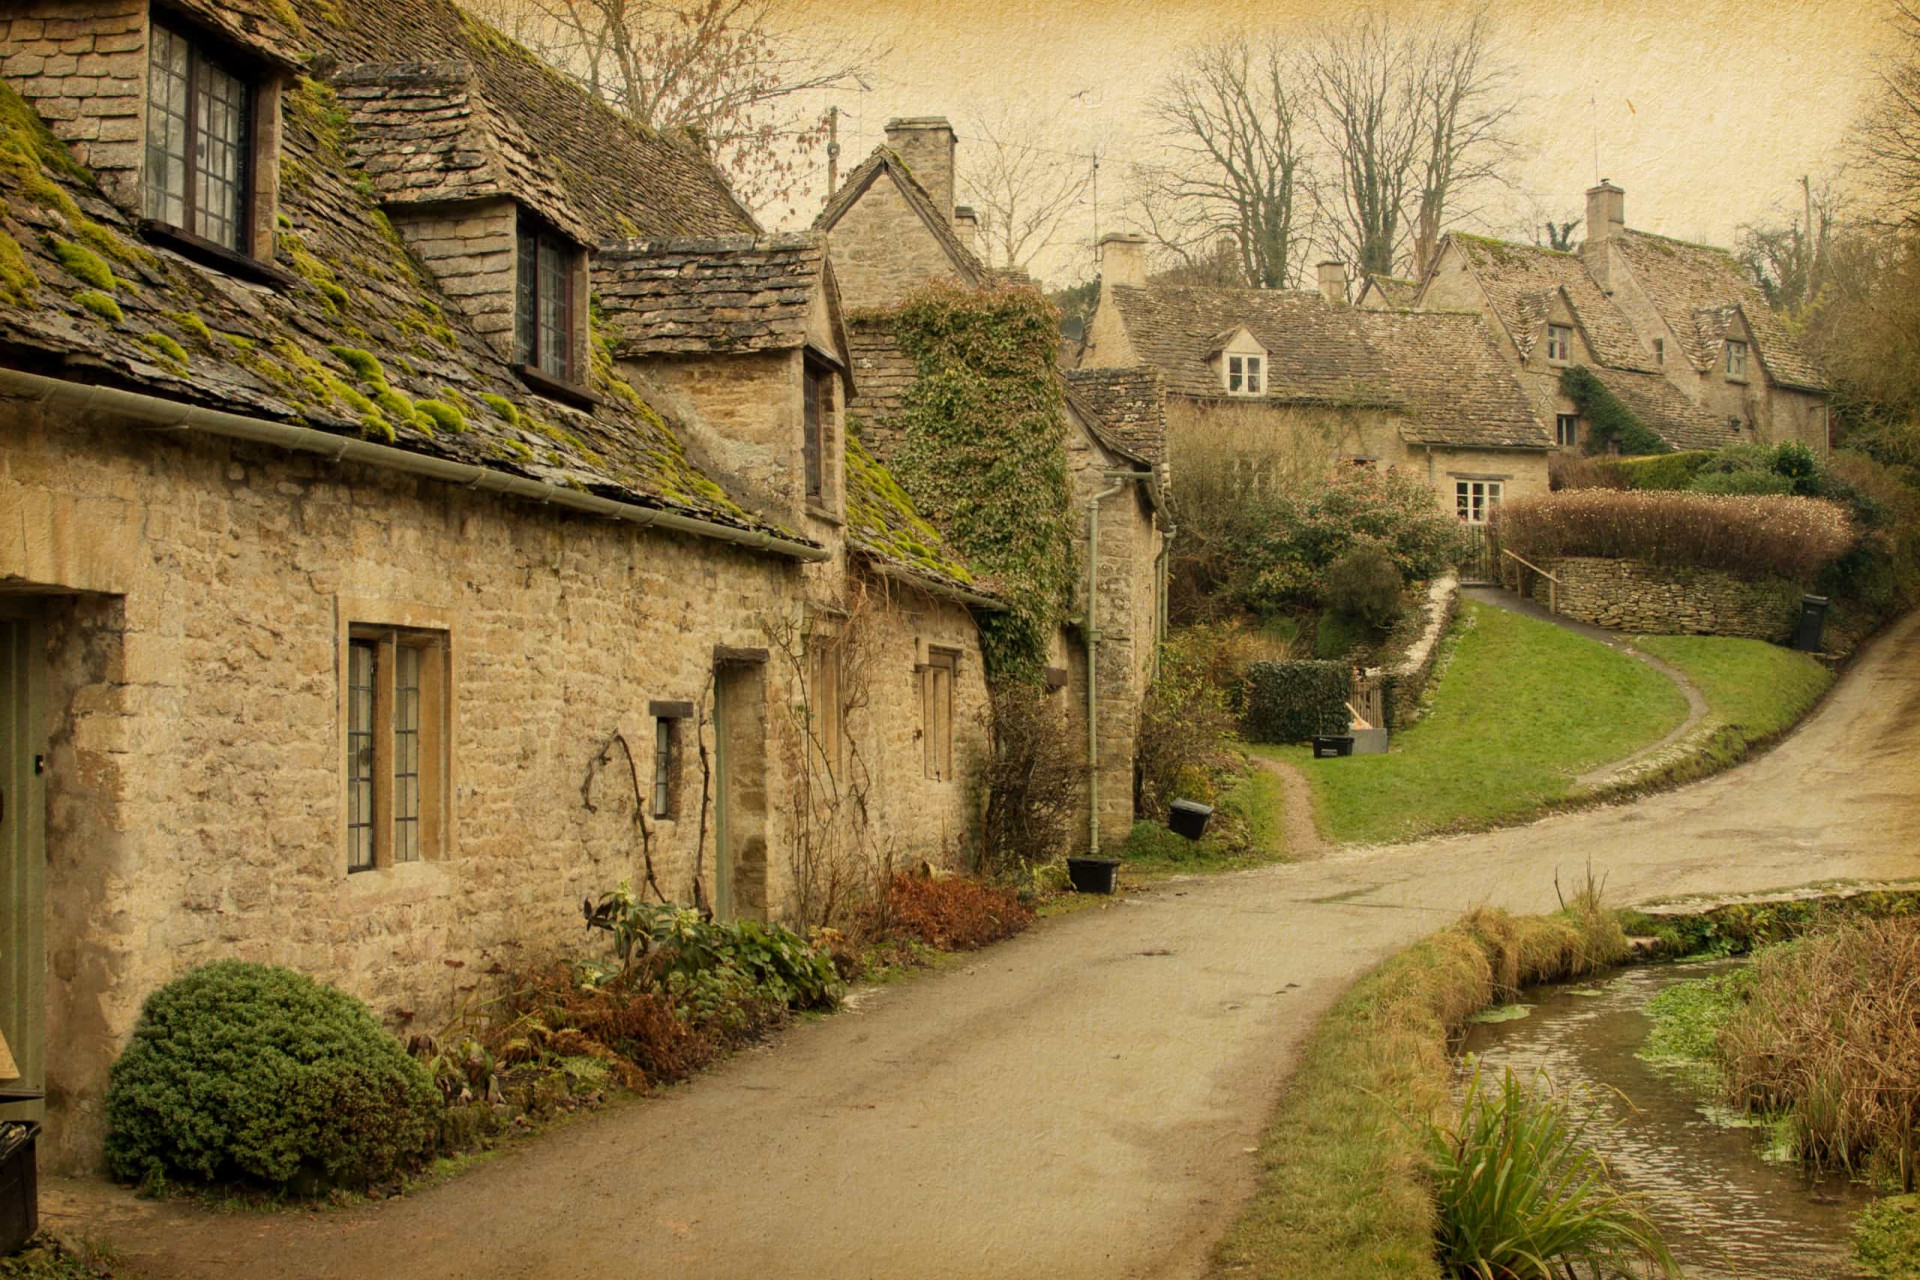 <p>Bilbury in Gloucestershire is another town known for its quaintness. When you are there, be sure to visit Arlington Row, one of the sweetest streets around. The town is also near Cirencester and so it makes a good pit stop on your way.</p>